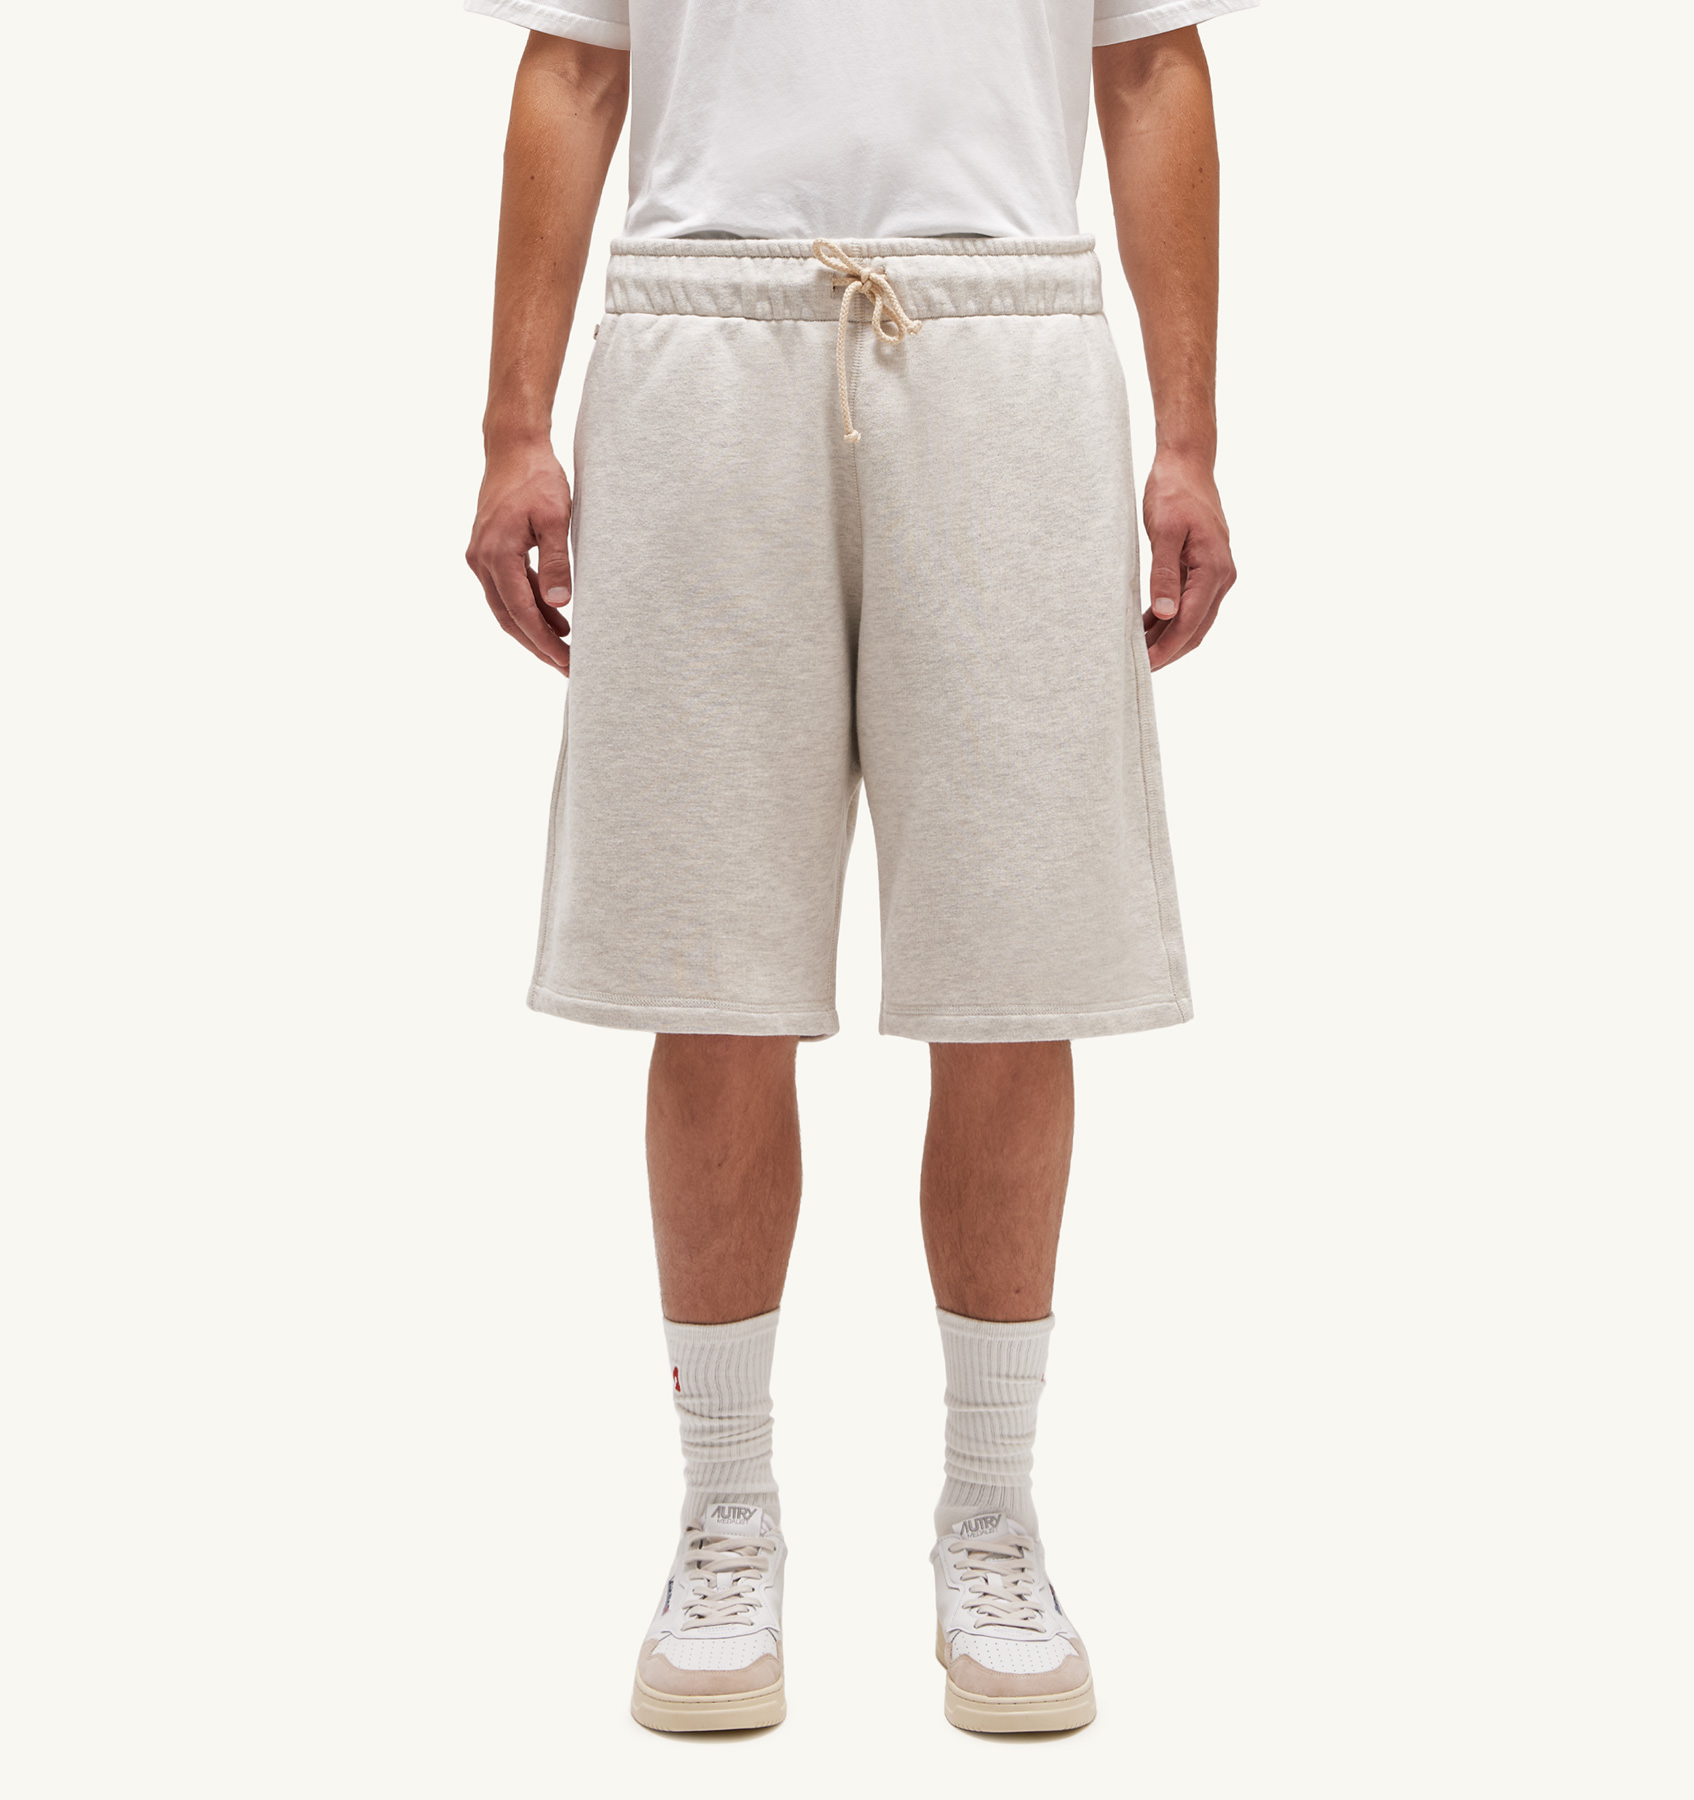 AUTRY ACTION PEOPLE Ease Sweat Shorts in Ecru Melange S